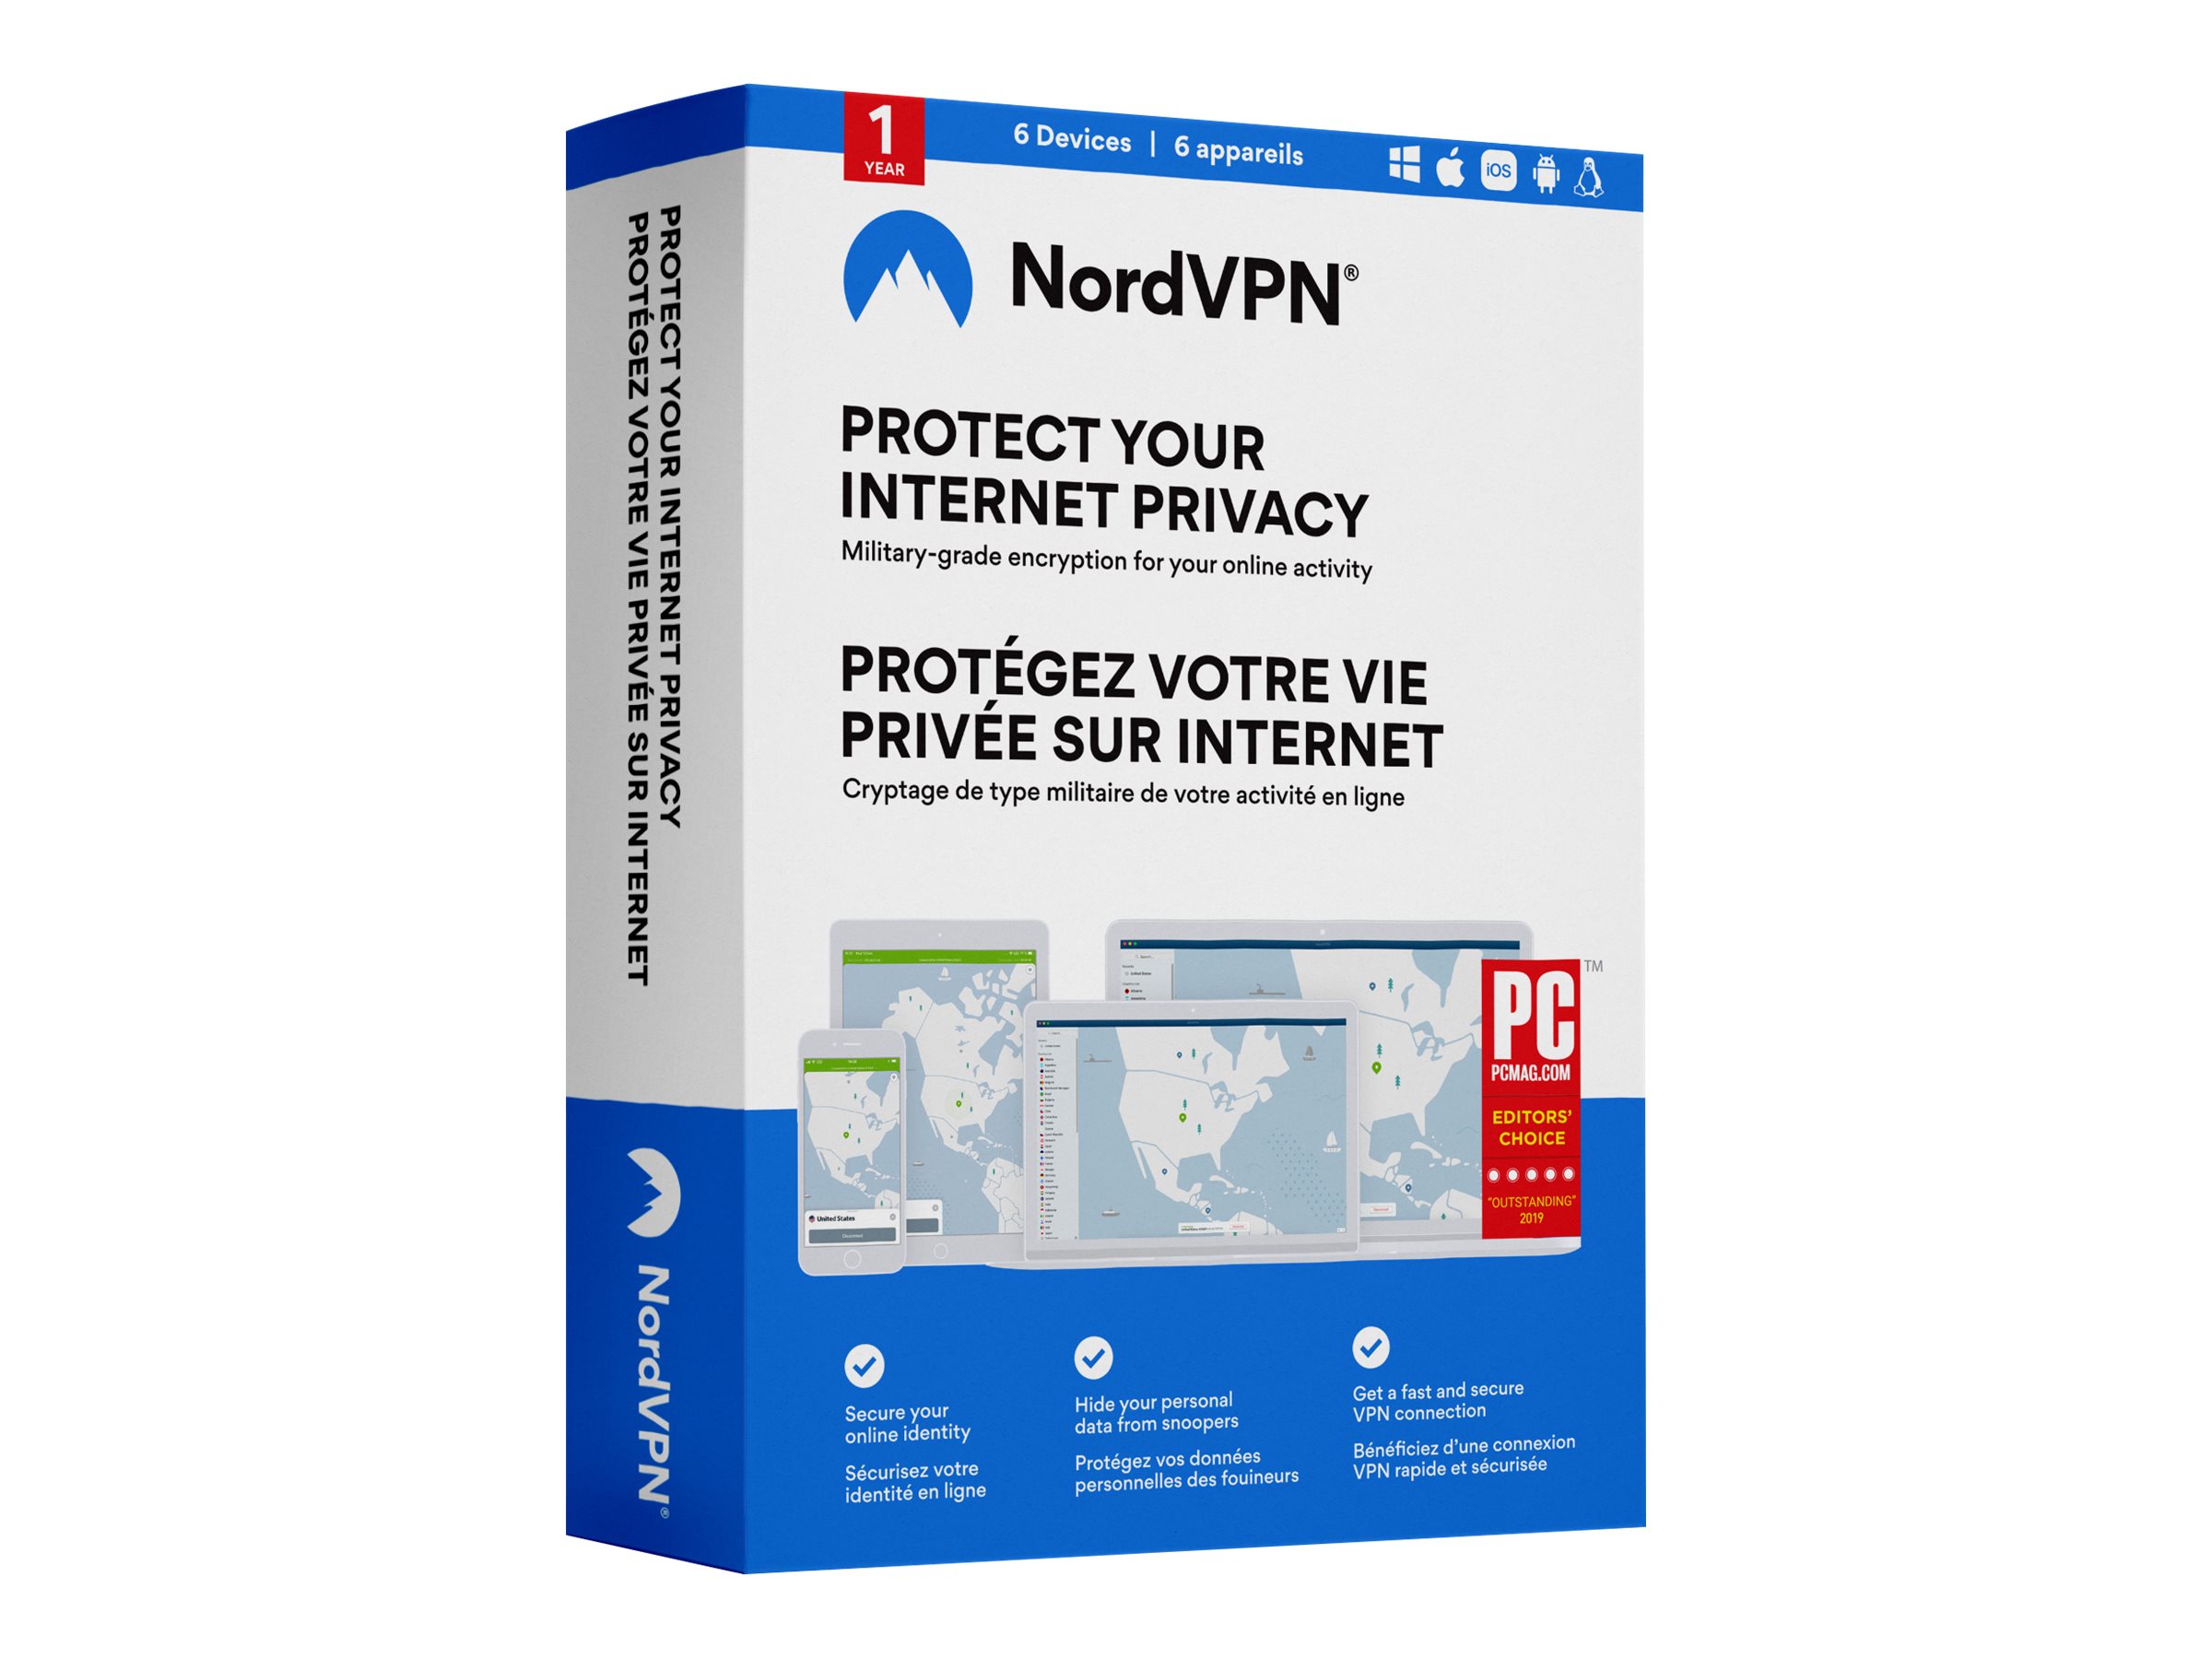 “NordVPN Introduces Cyber Insurance Benefits: A Game-Changer in Cybersecurity Protection”